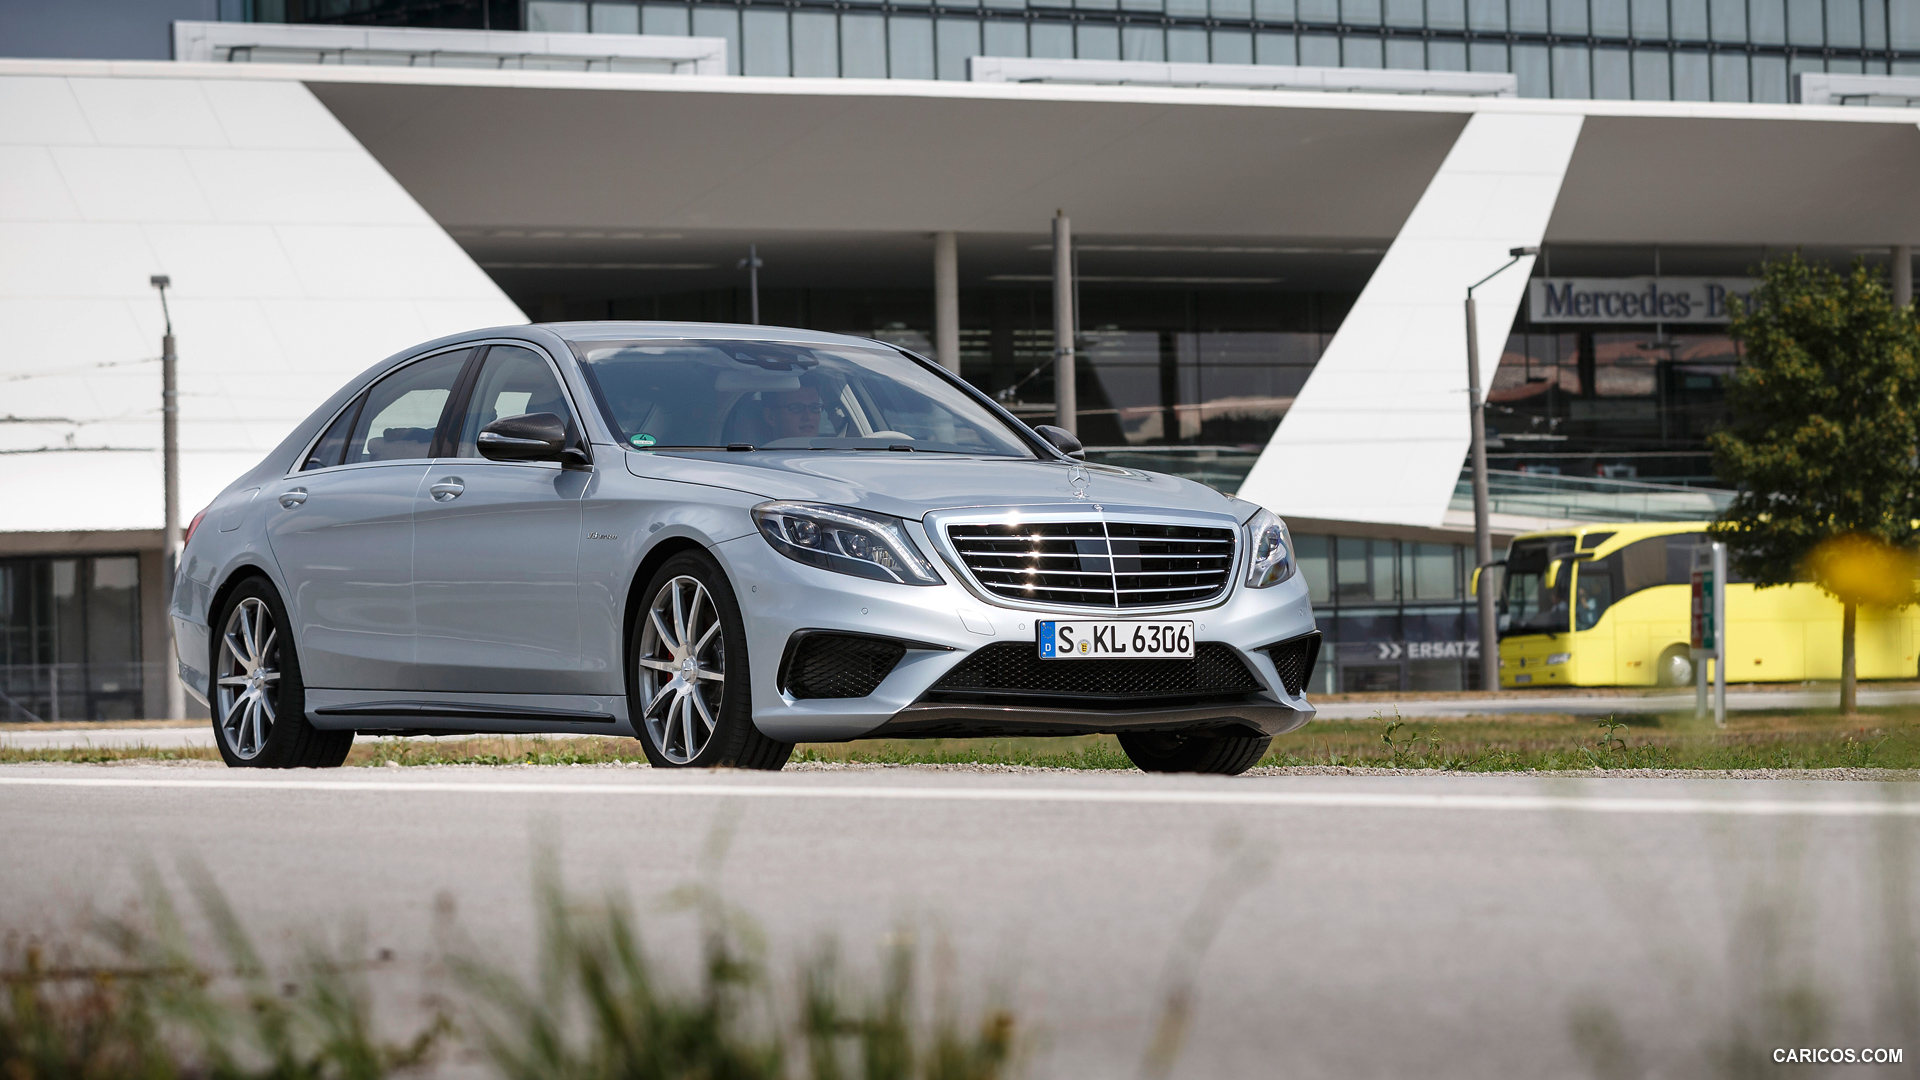 Mercedes-Benz S63 AMG W222 (2014)  - Front, #32 of 102